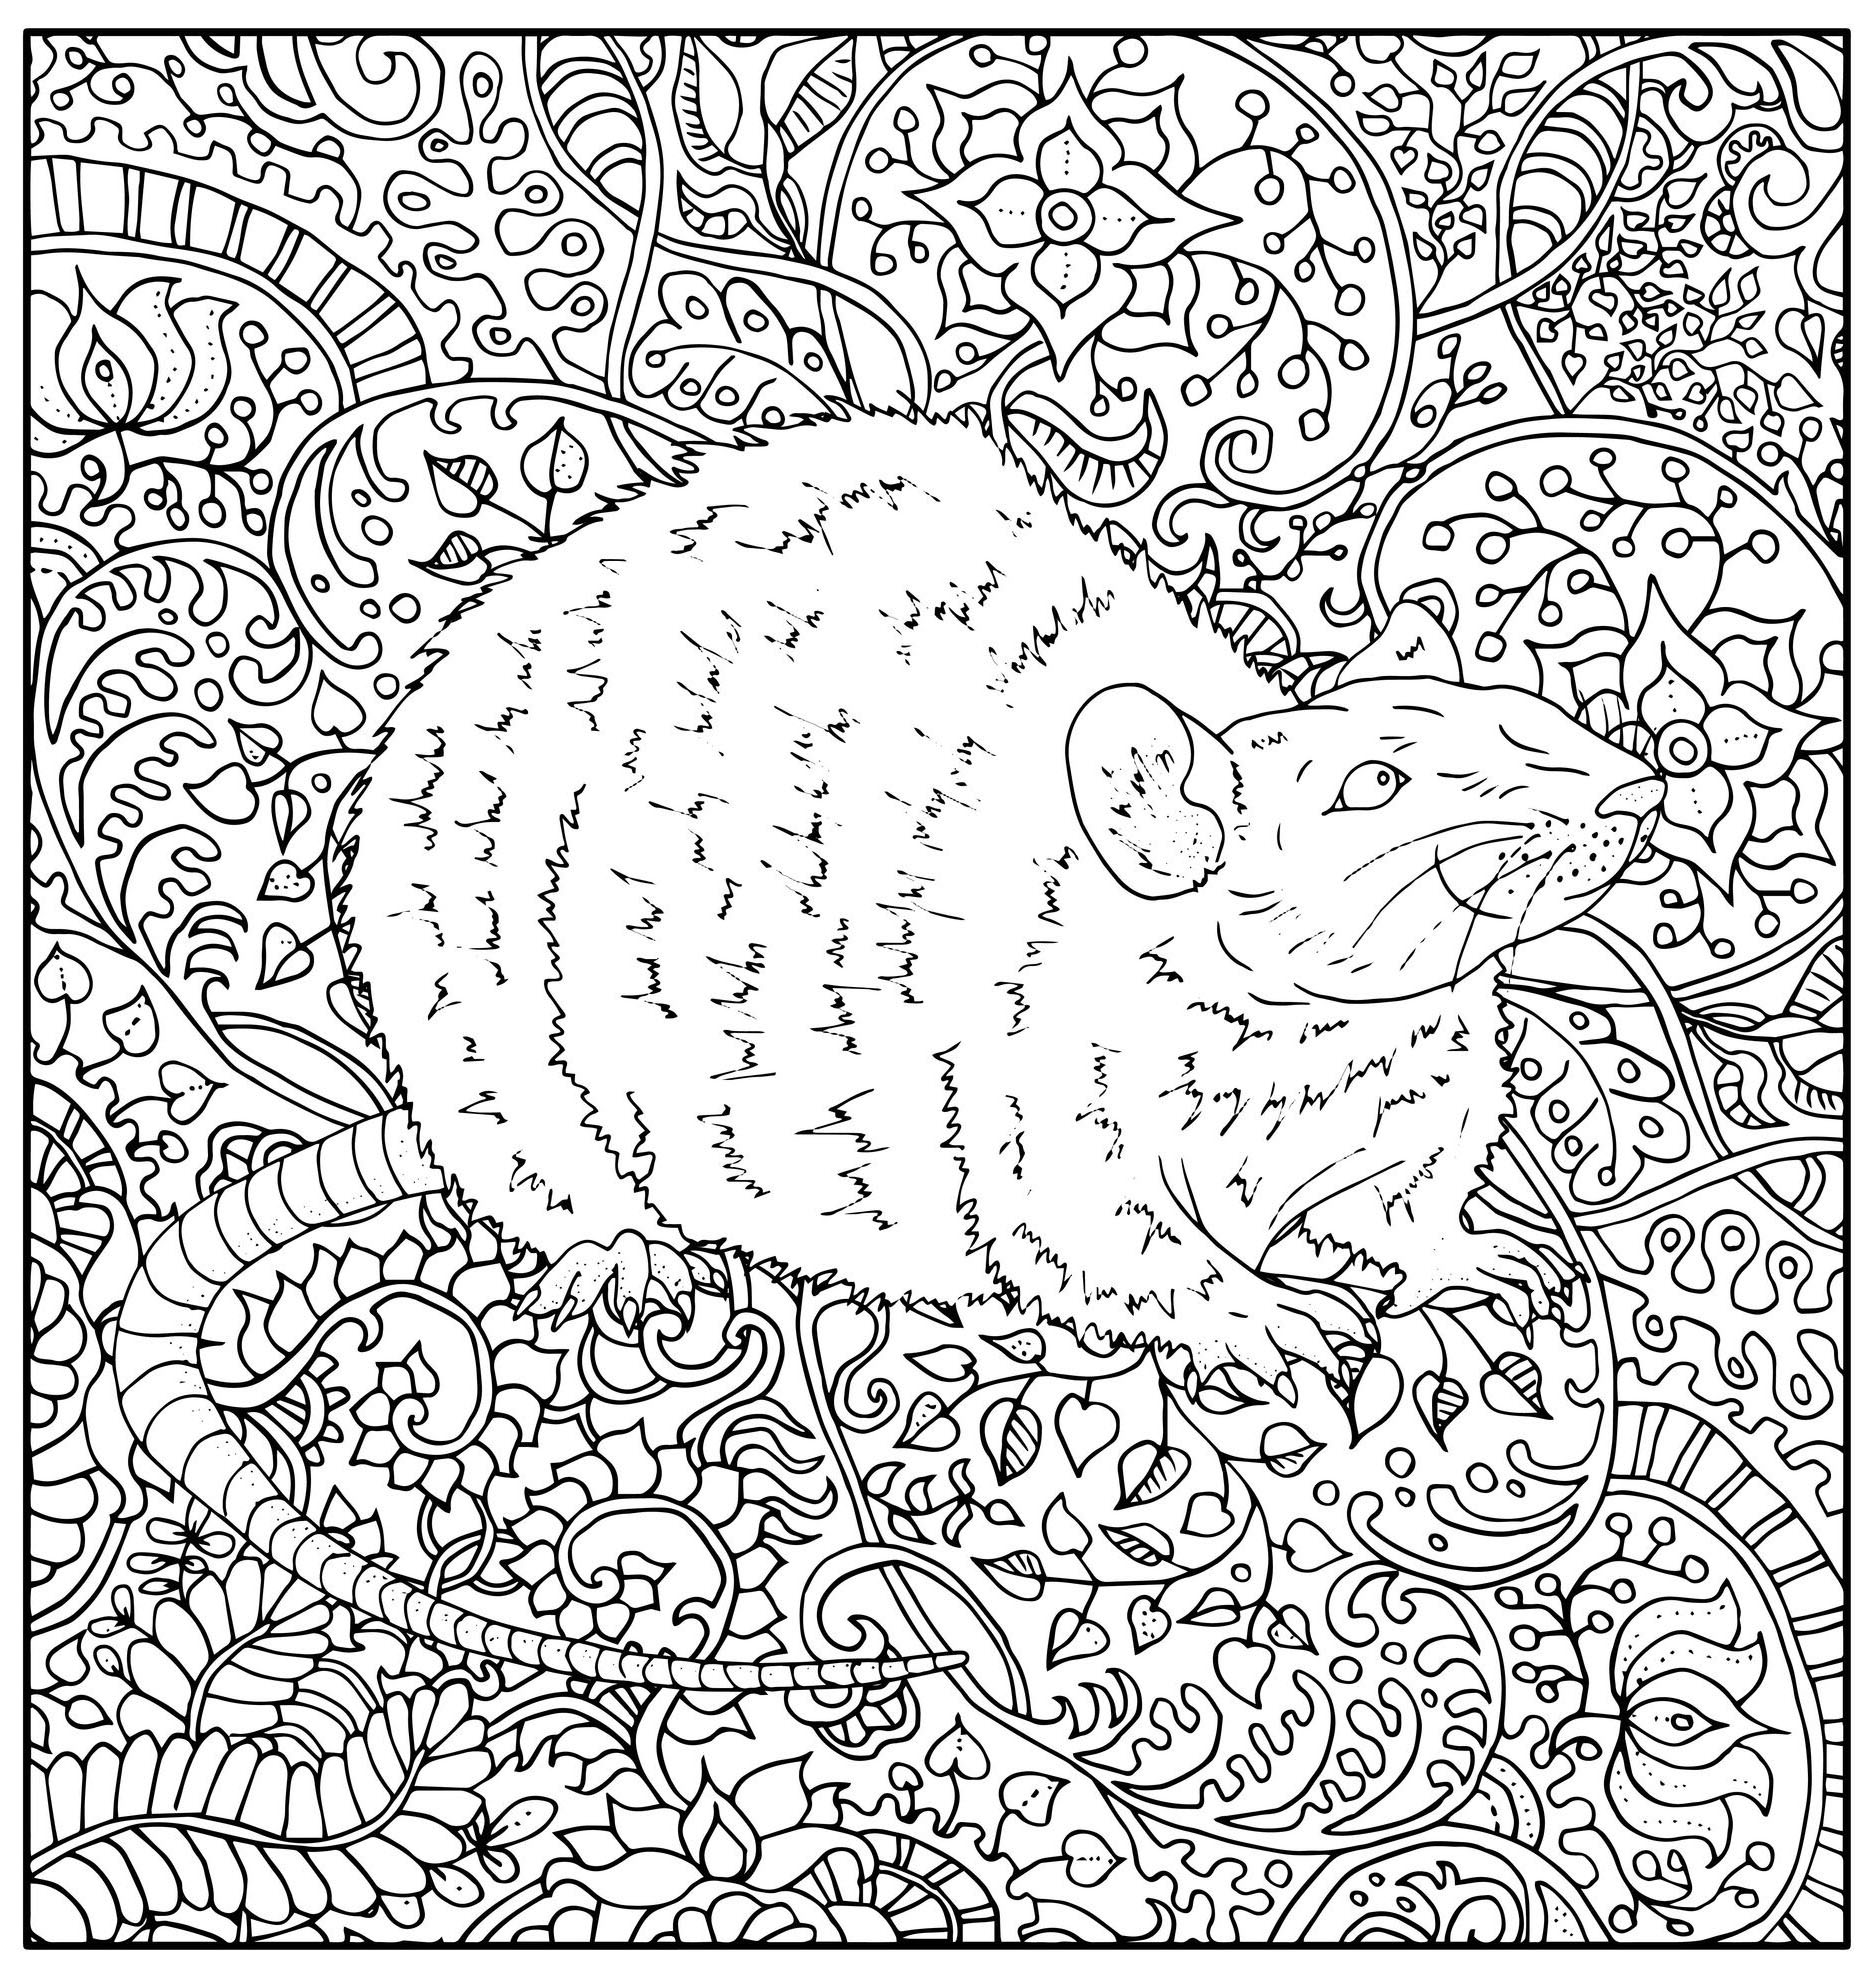 Coloring page representing a realistically drawn rat with various abstract vegetal patterns